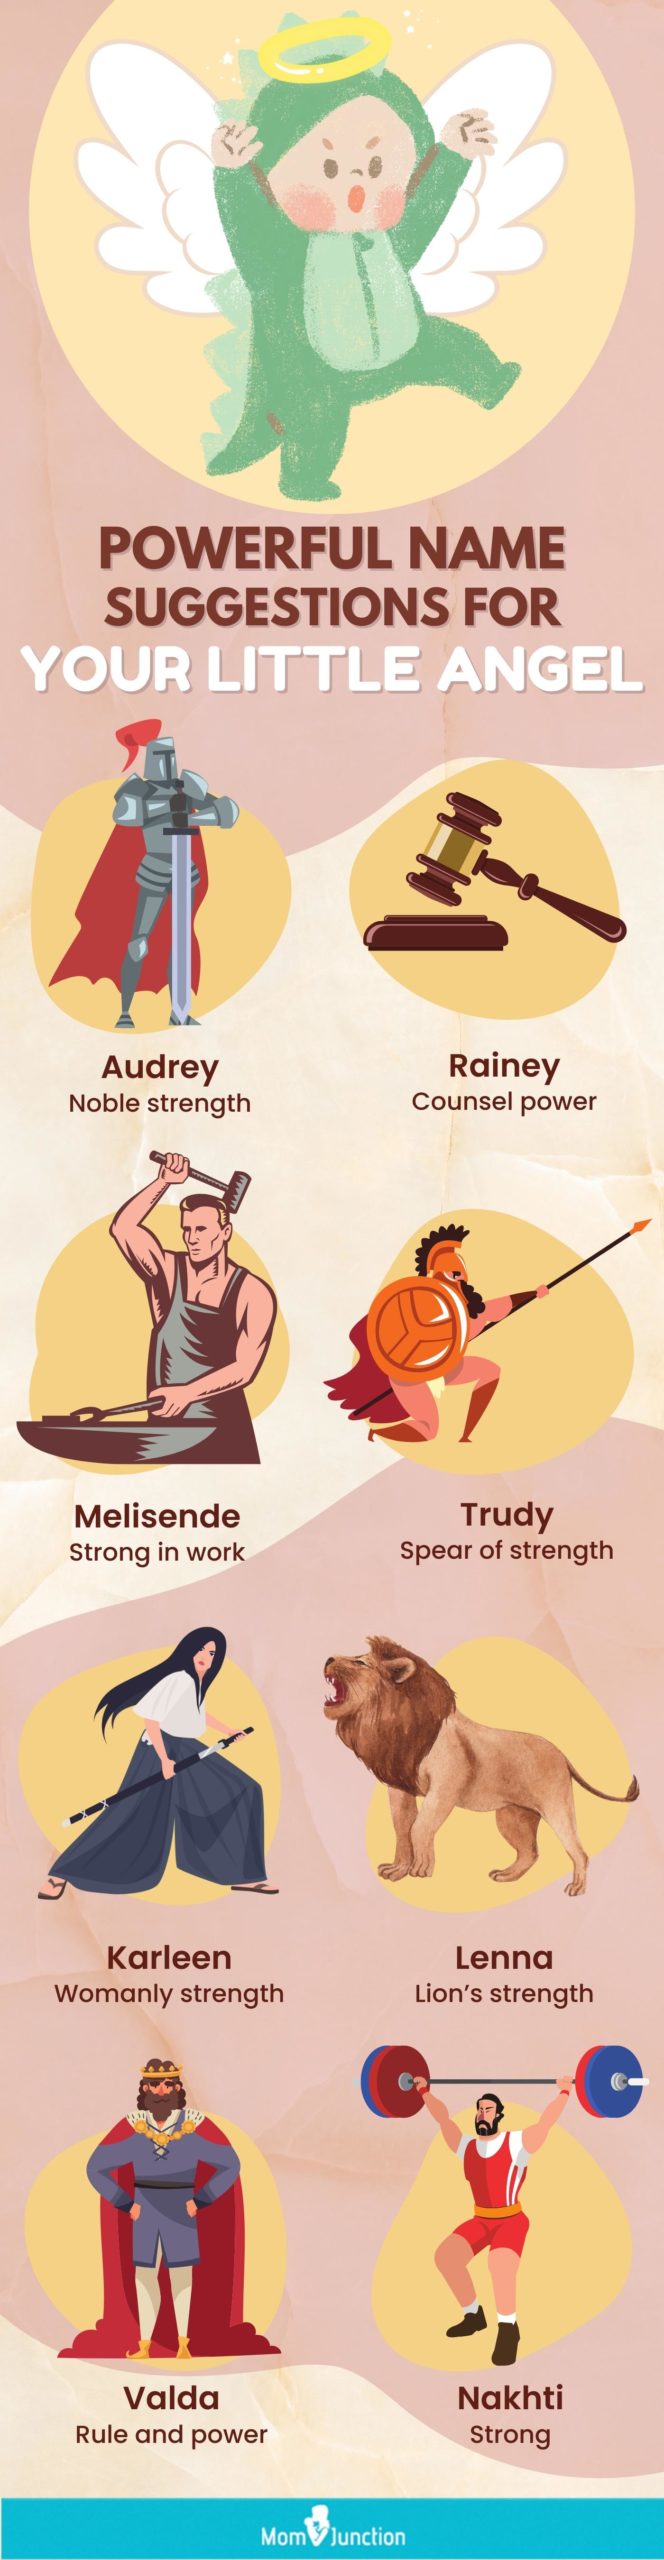 powerful name suggestions for your little angel [infographic]